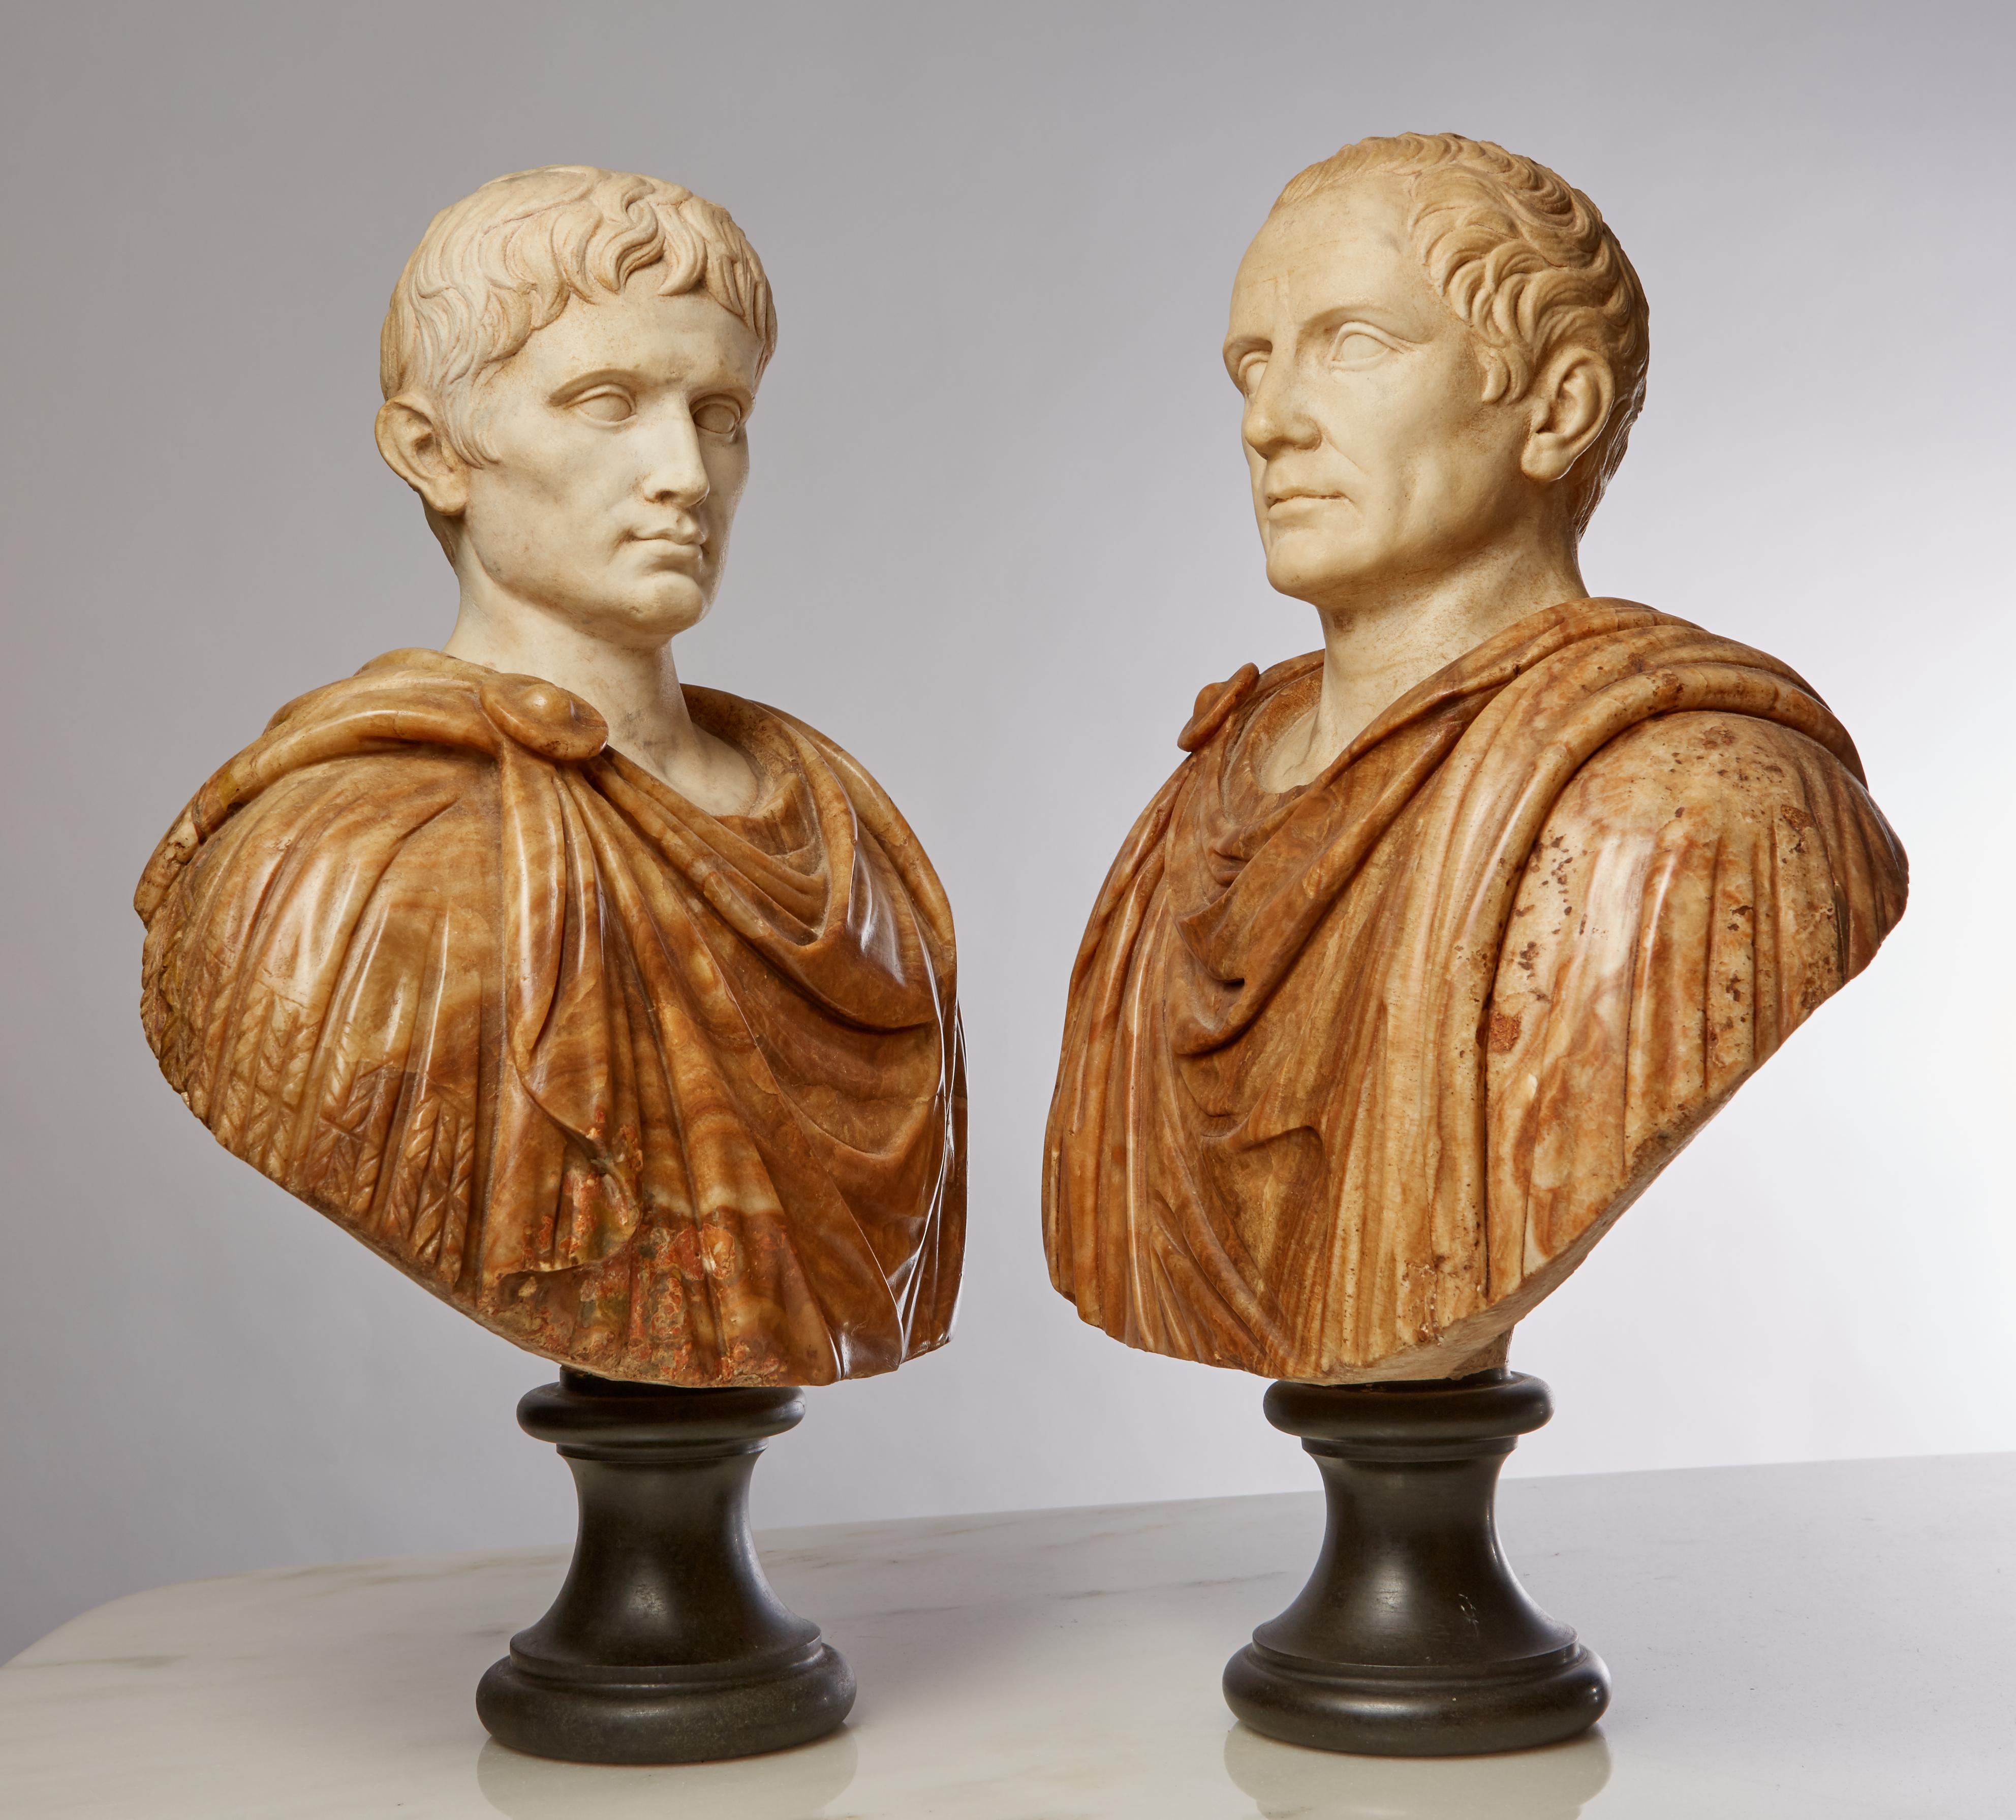 An exquisite pair of 19th century Grande Tour marble busts of the Roman Emperors Caesar Augustus and Diocletian molded in the ancient style. Rising from black marble bases, their bodies draped in flowing togas, fastened at the neck with the Imperial